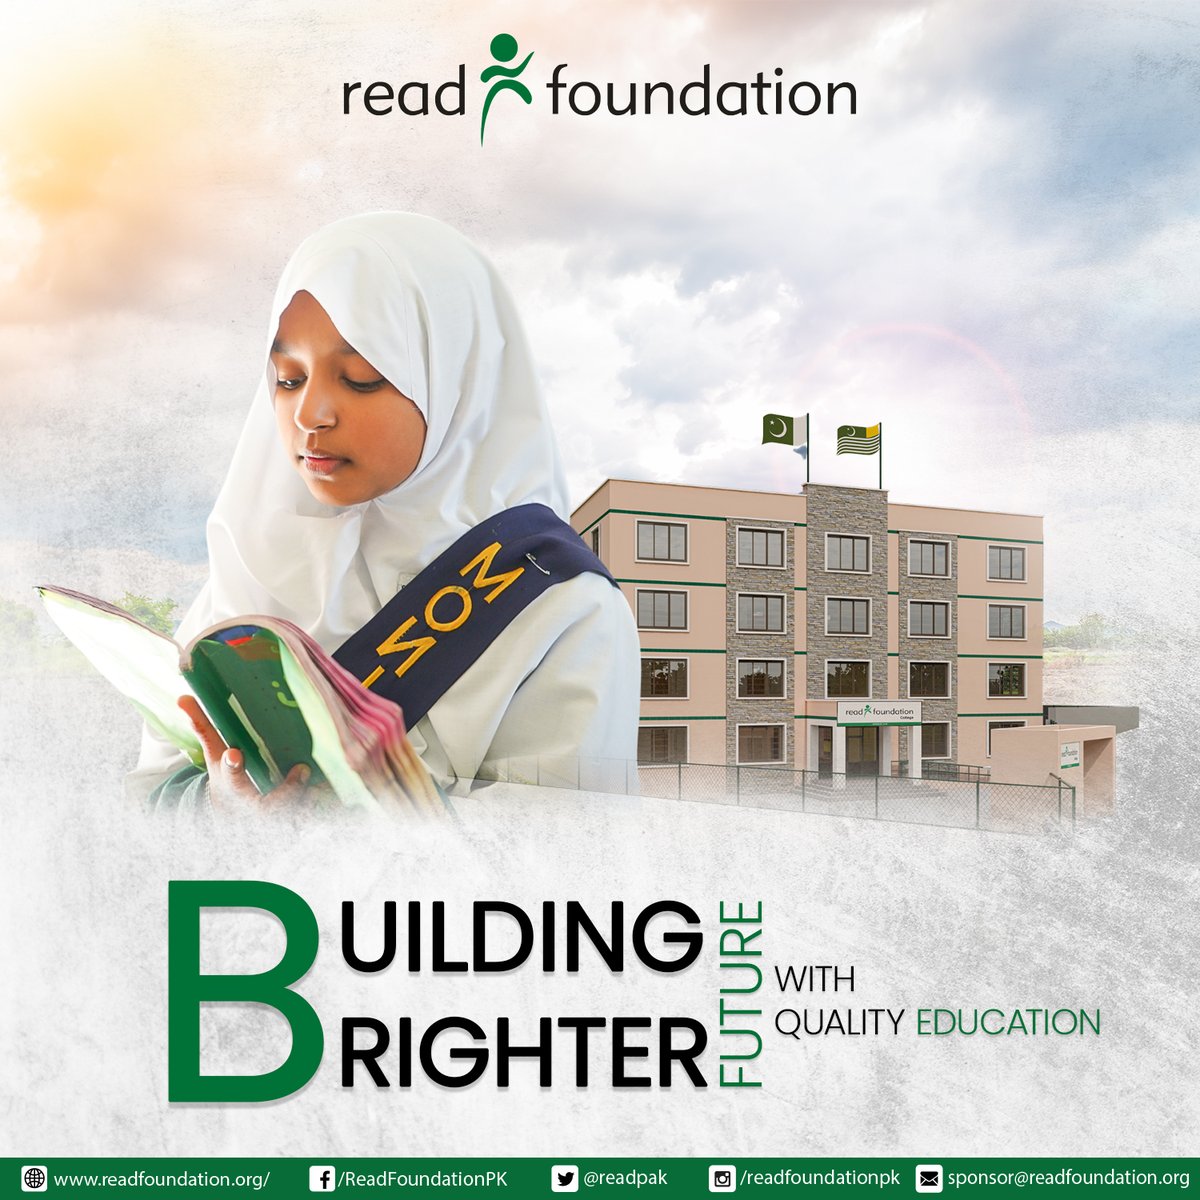 Empowering minds through quality education is the cornerstone of building a bright future. Let's promote quality education and sustainable growth. #READFoundation #education #society #progress